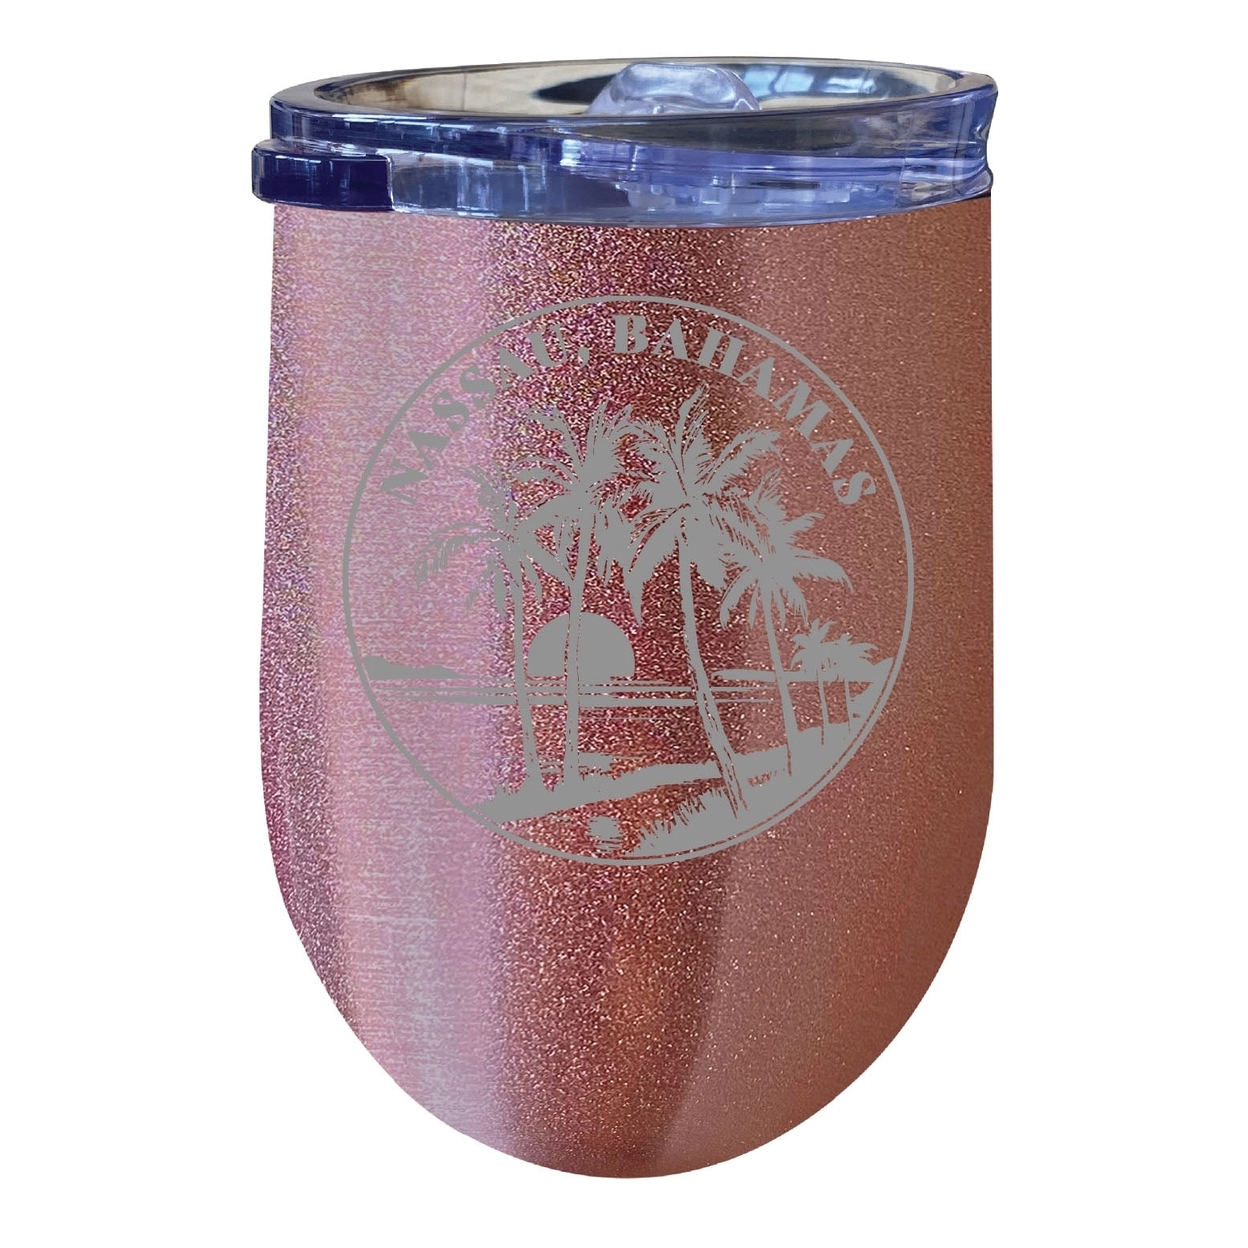 Nassau The Bahamas Souvenir 12 Oz Engraved Insulated Wine Stainless Steel Tumbler - Rose Gold,,2-Pack